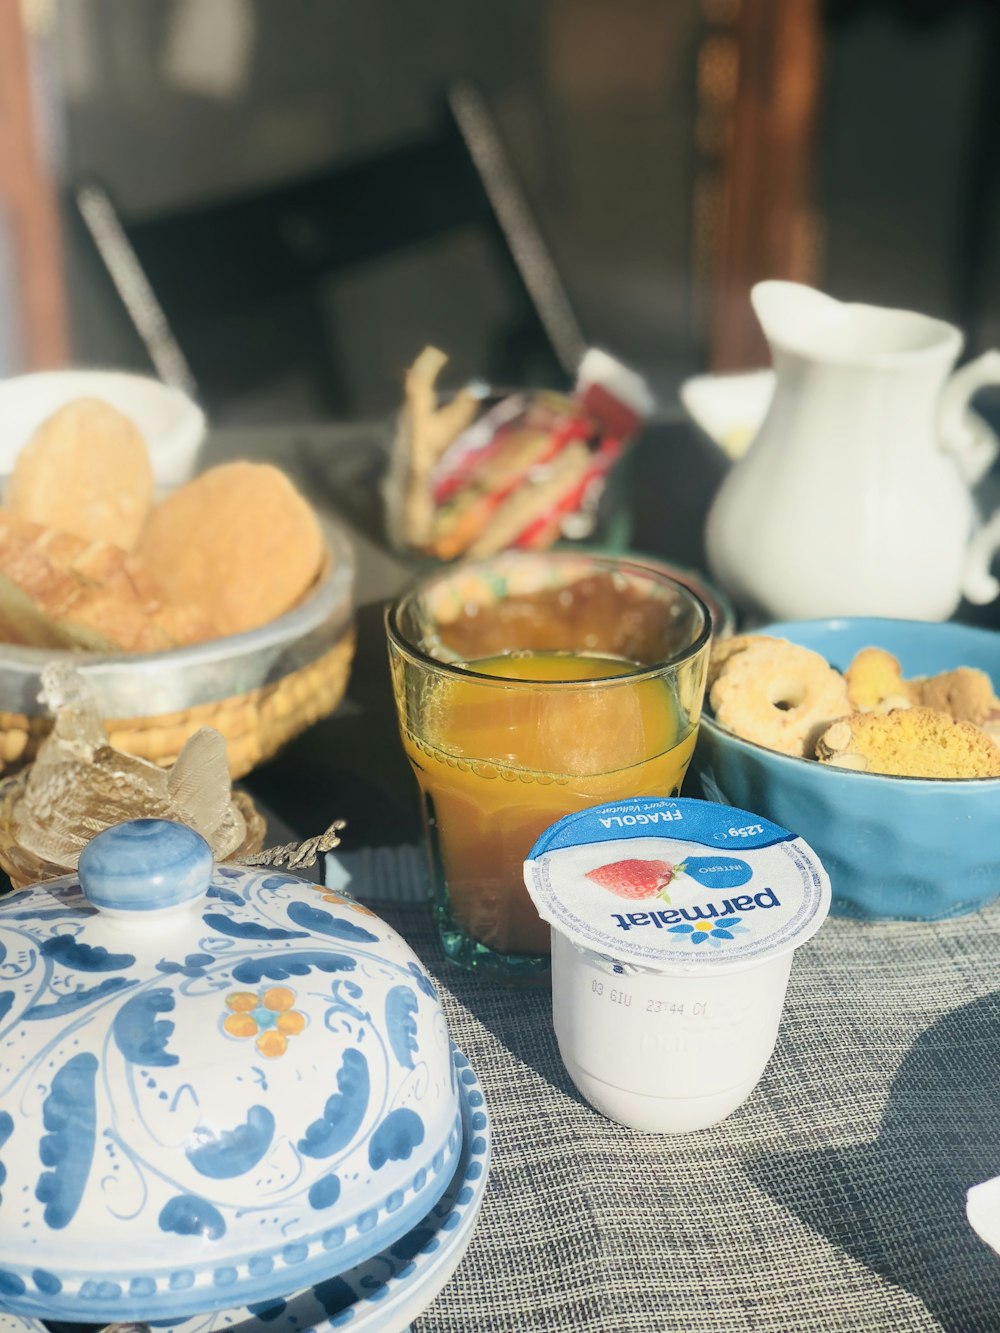 cookies near orange juice and Parmalat container